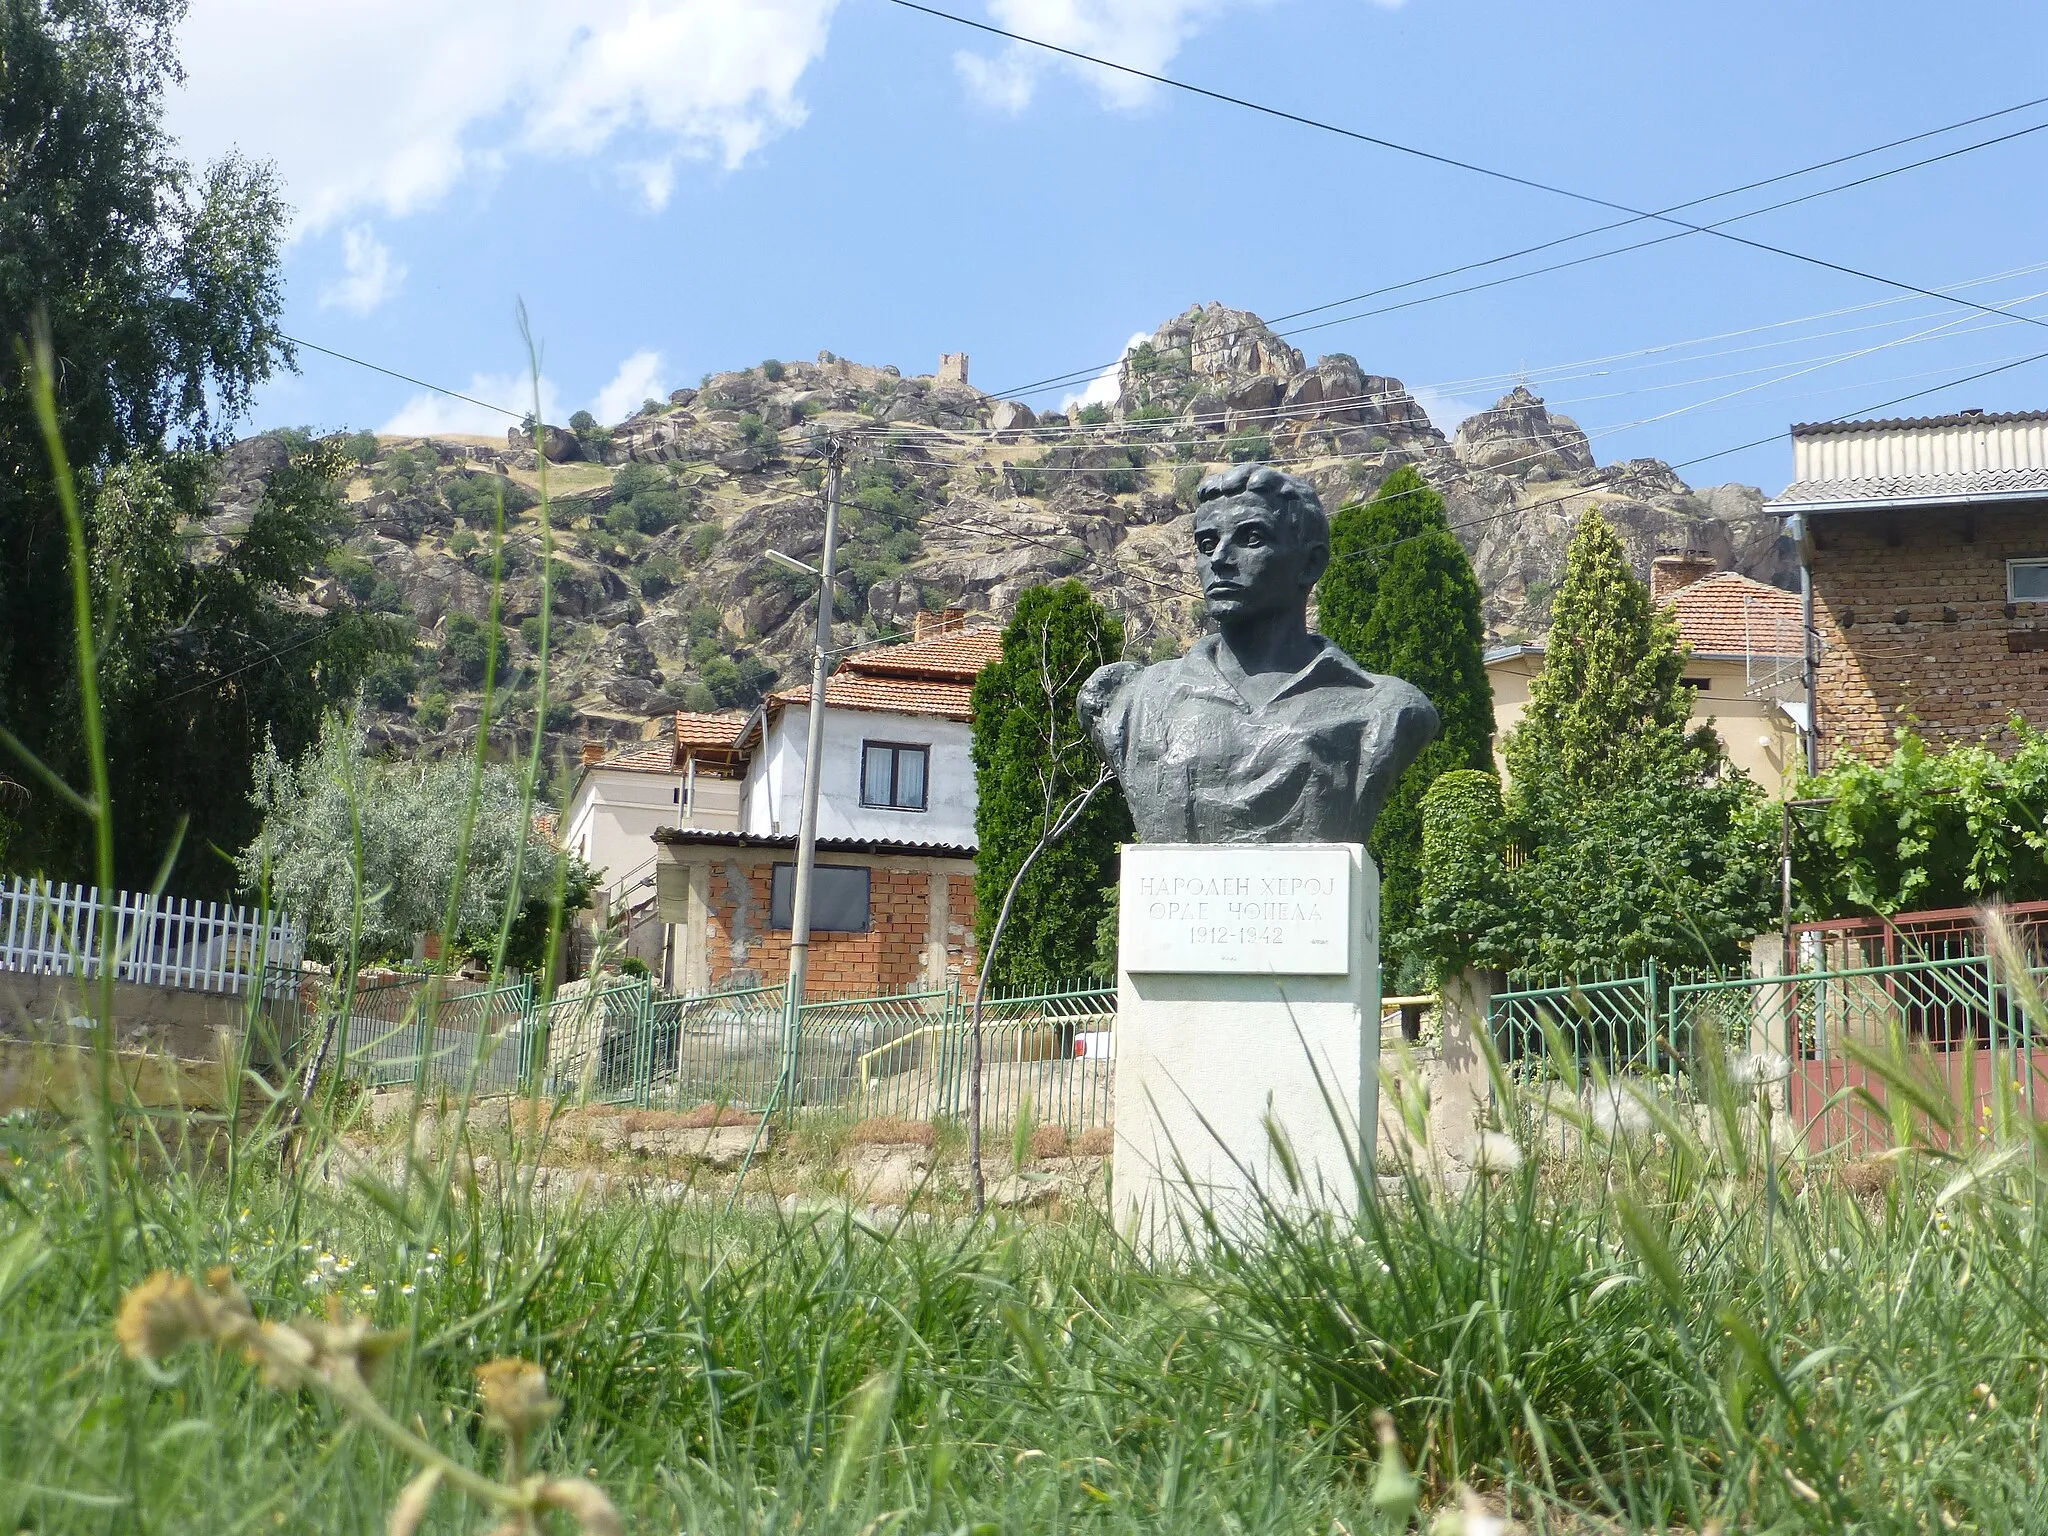 Photo showing: In the Varosh neighborhood of Prilep. A monument to a WWII resistance hero, with the Markovi Kuli in the background